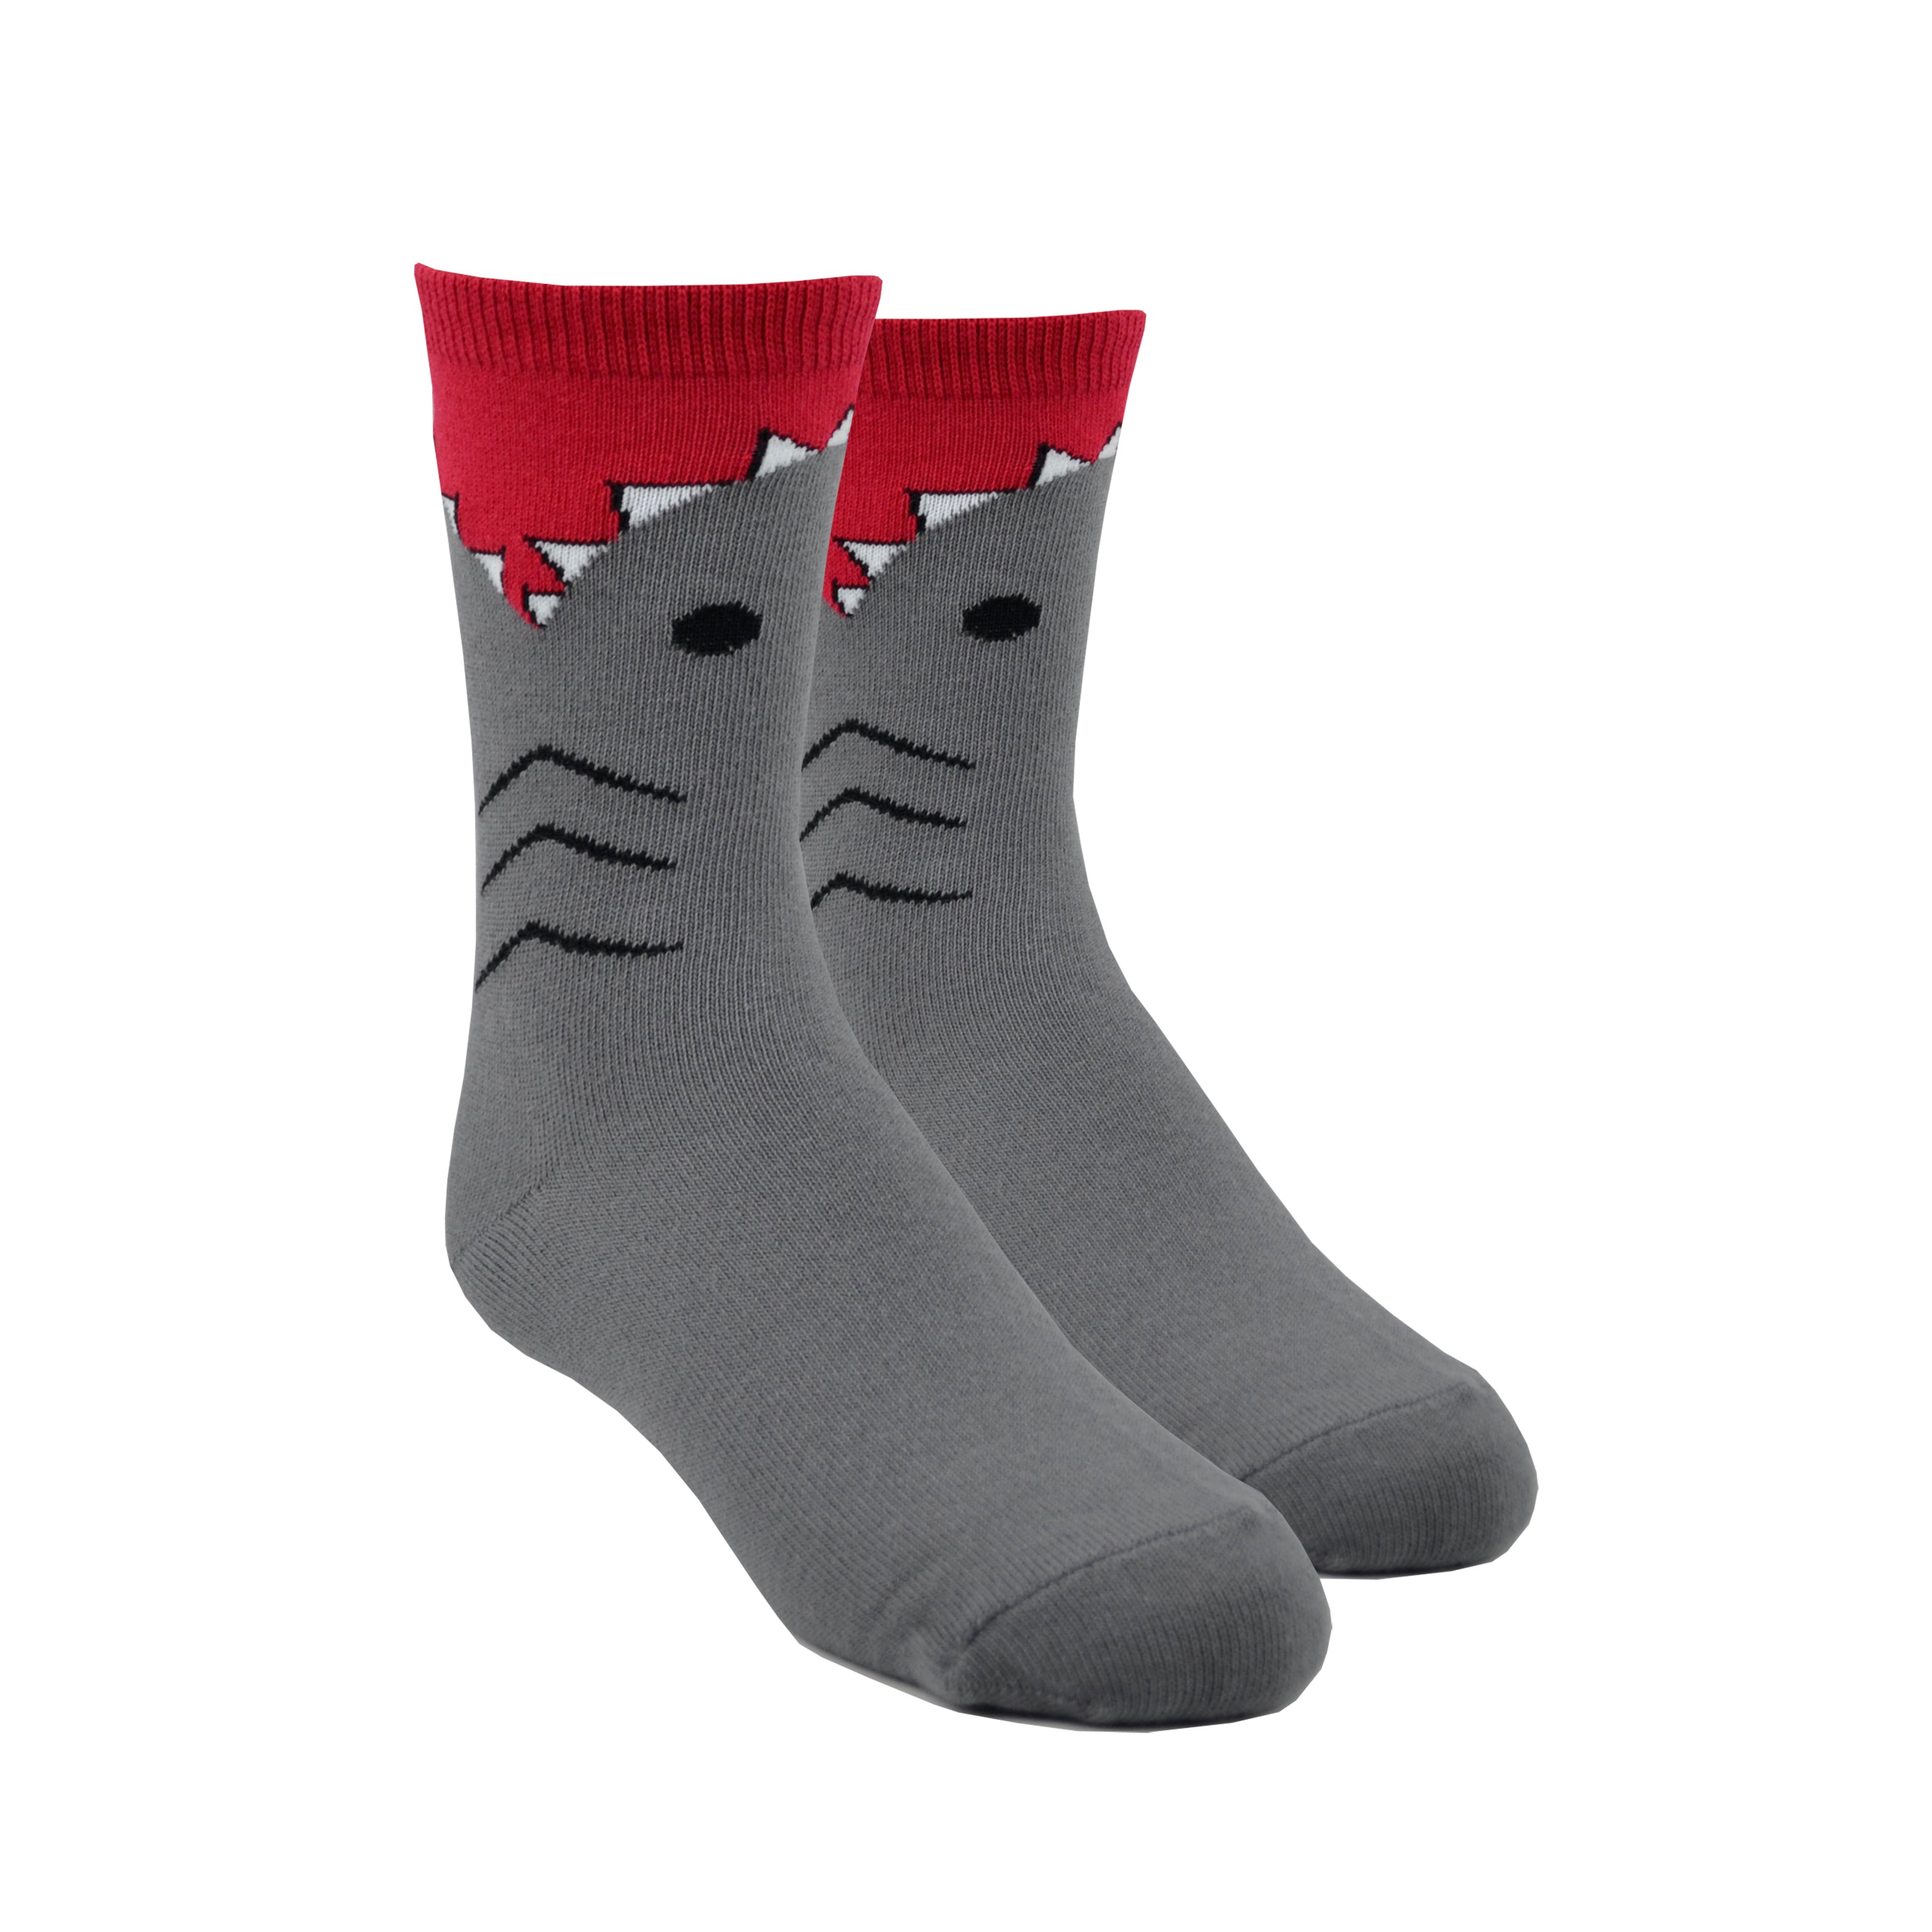 Shown on leg forms, a pair of K.Bell brand kids cotton crew socks in grey. The foot and heel are grey with the top being red with a shark teeth design around it.